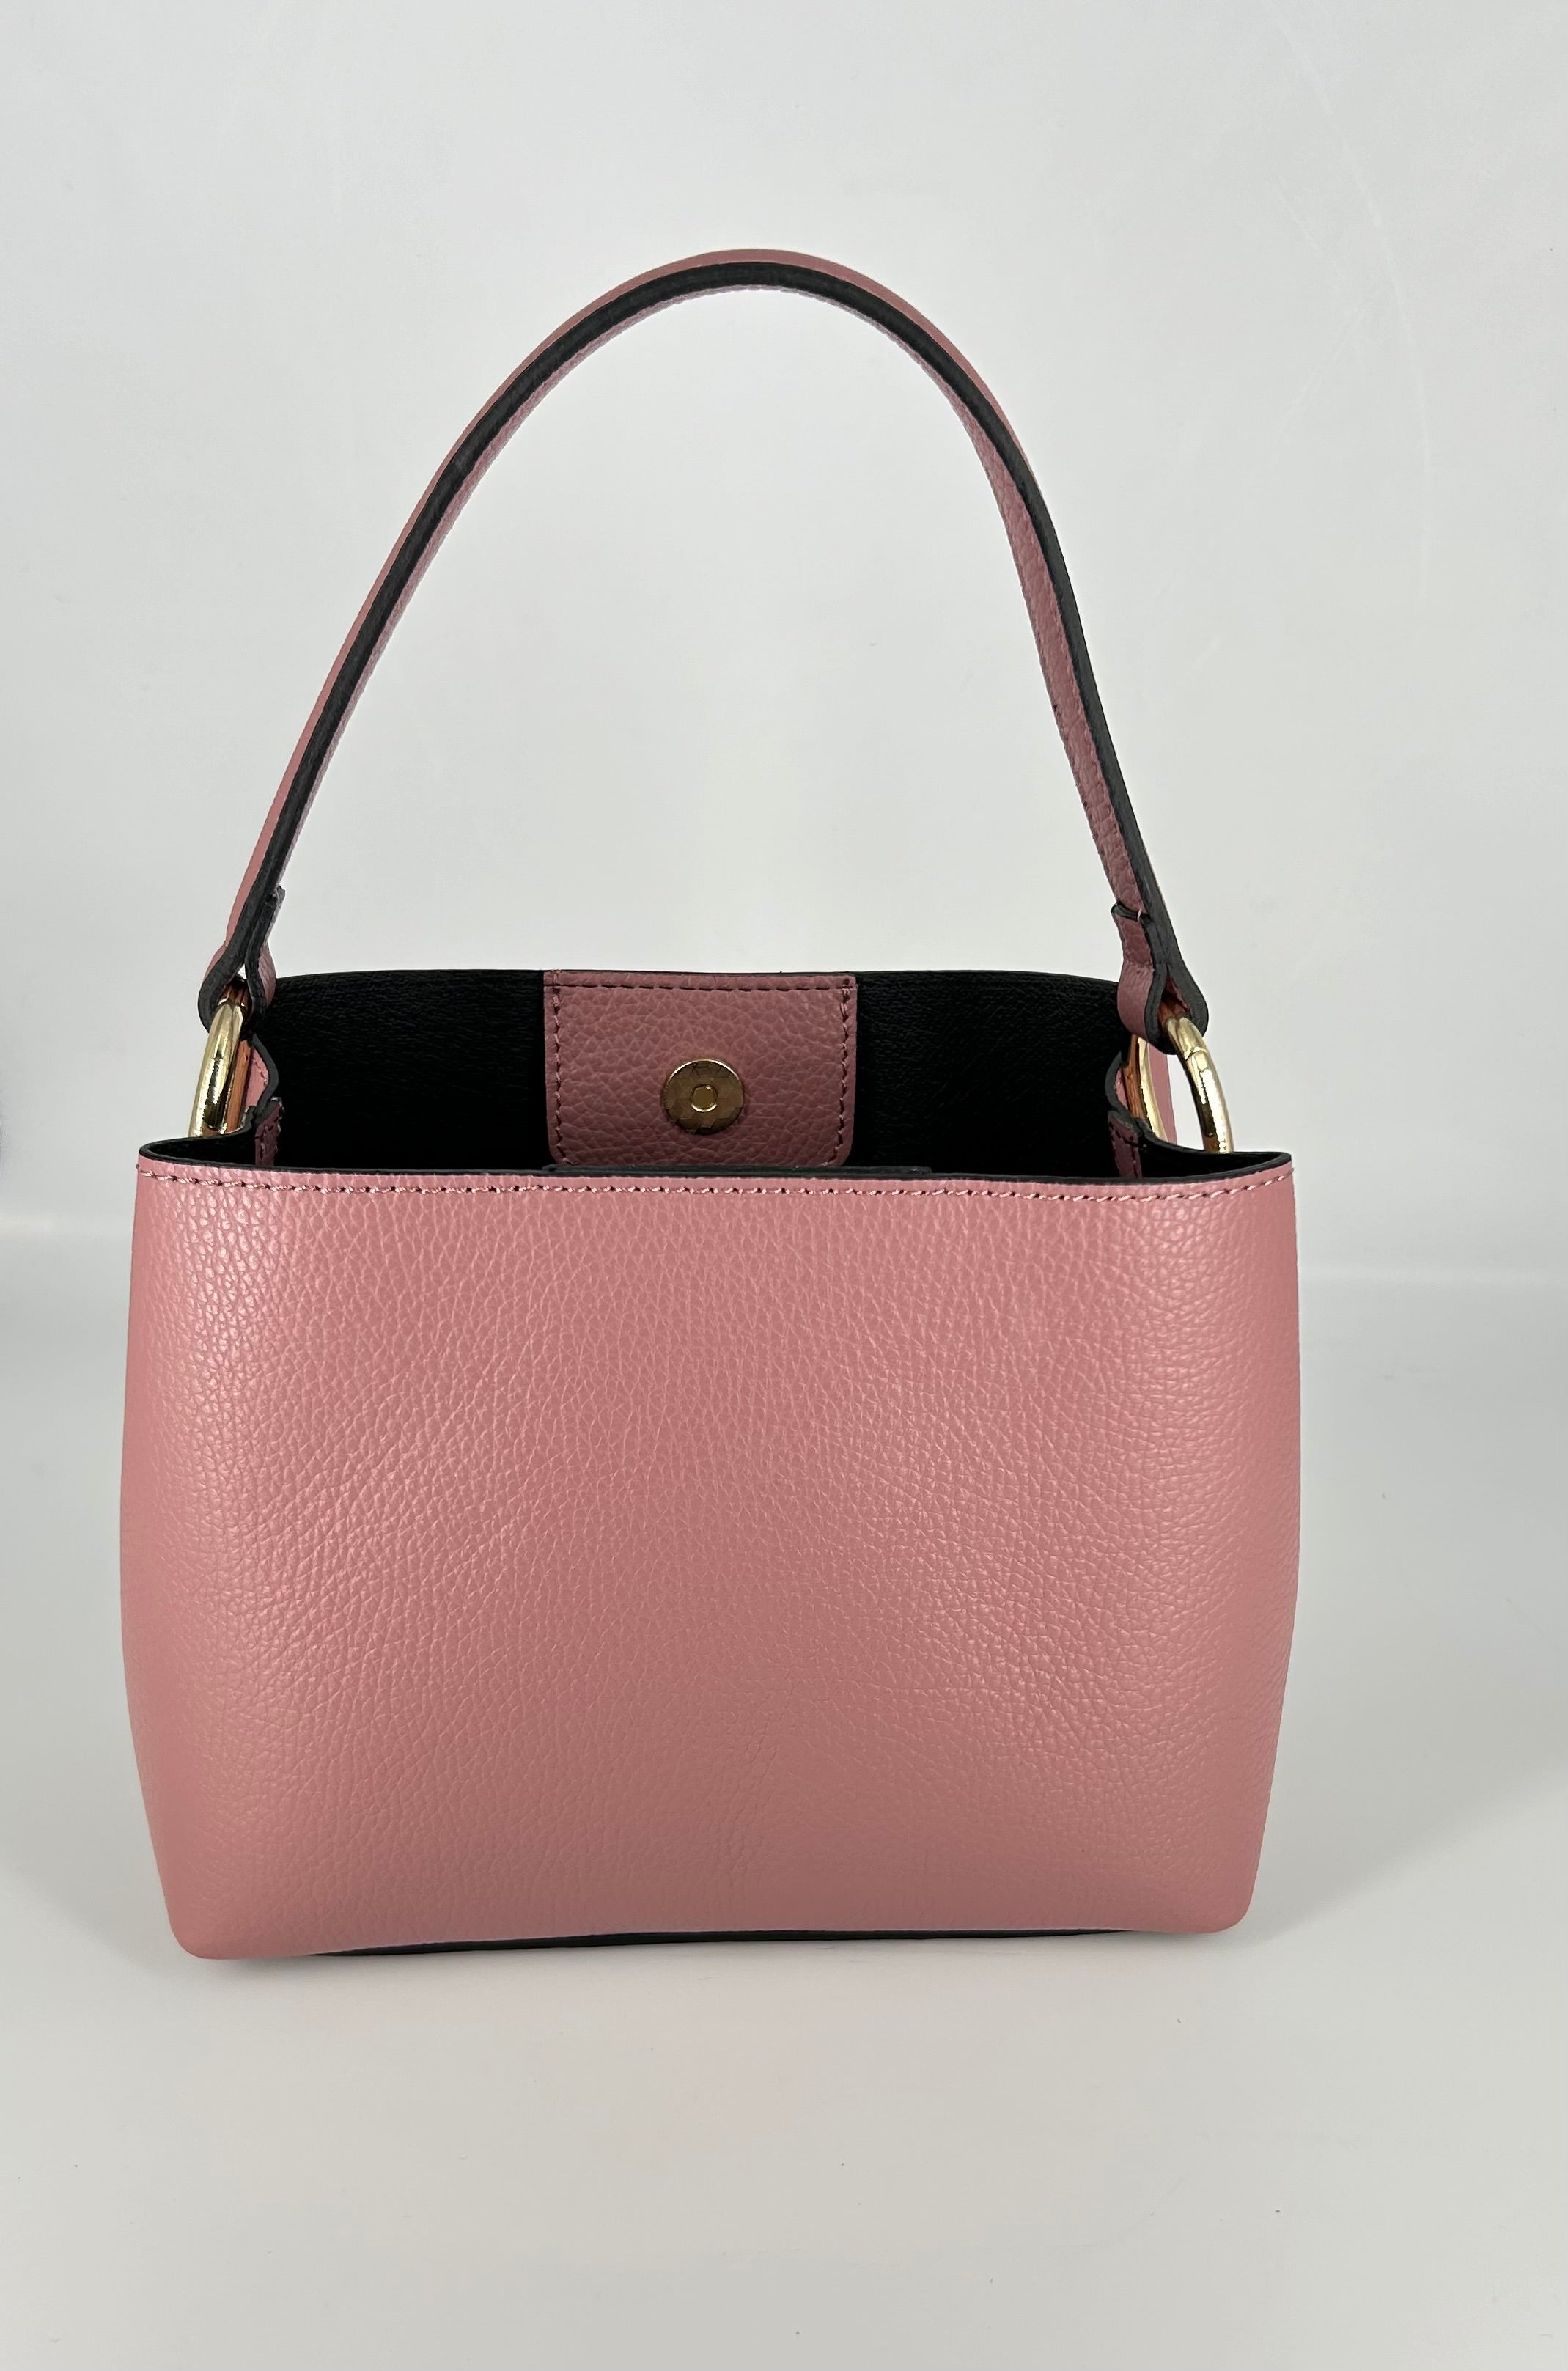 HANDBAG LEATHER WITH RING DETAIL- OLD ROSE